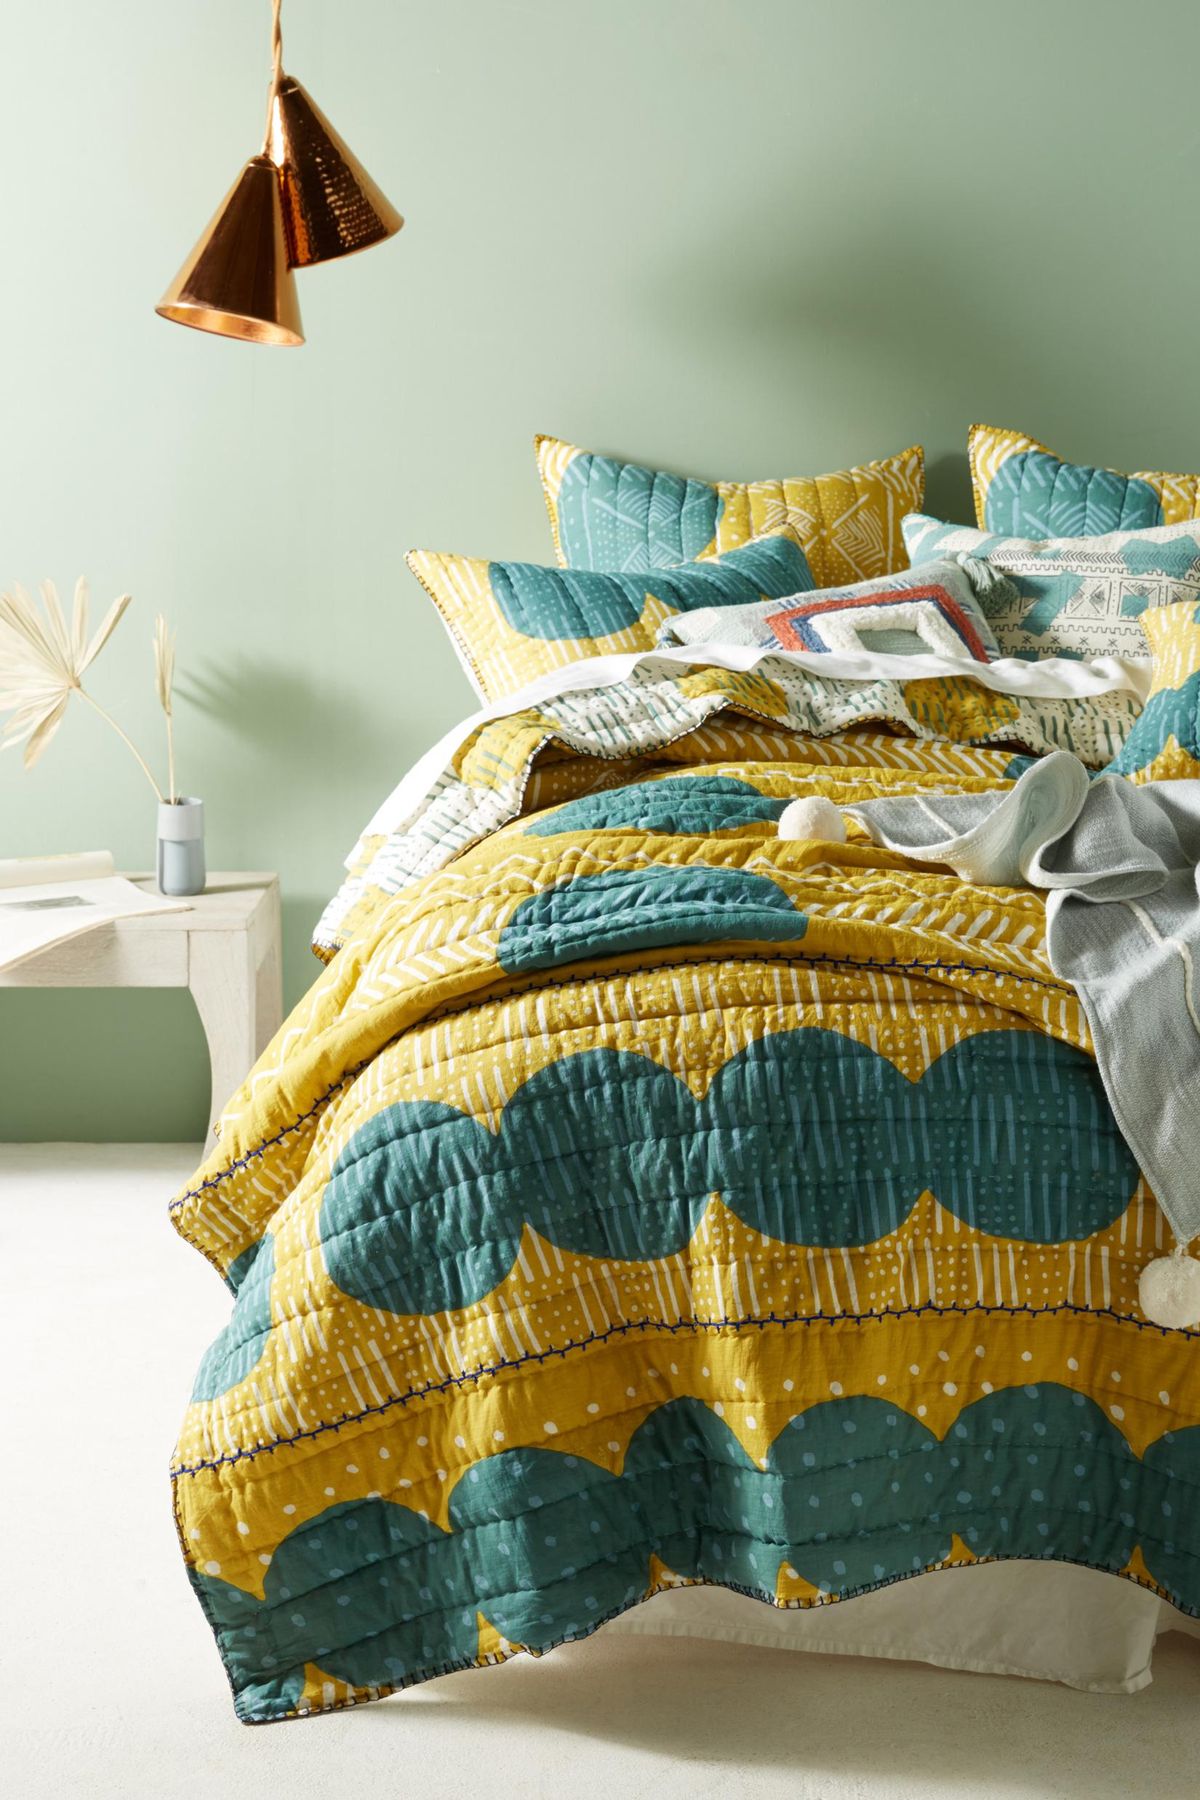 Anthropologie’s hand-embroidered Cardine Collection adds color and texture to the bedroom. (Anthropologie)